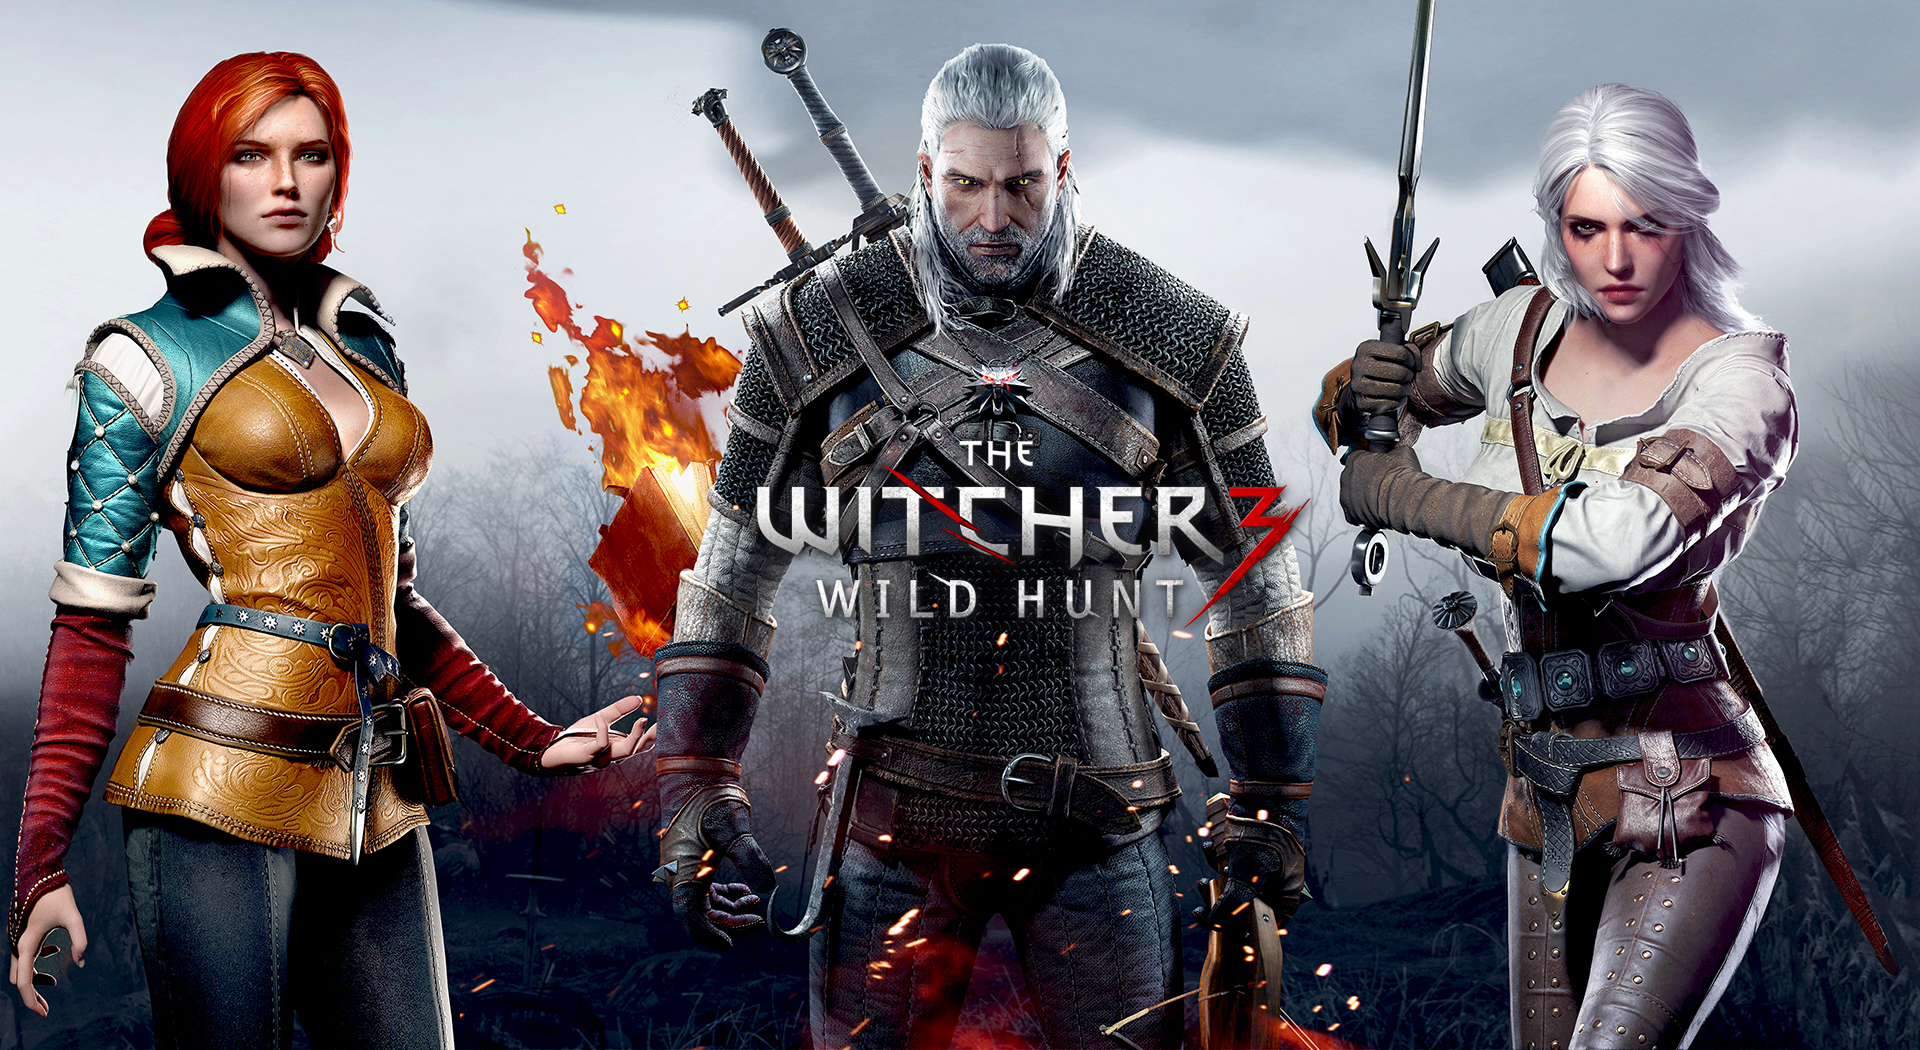 the witcher, video game, the witcher 3: wild hunt, ciri (the witcher), geralt of rivia, triss merigold Desktop home screen Wallpaper